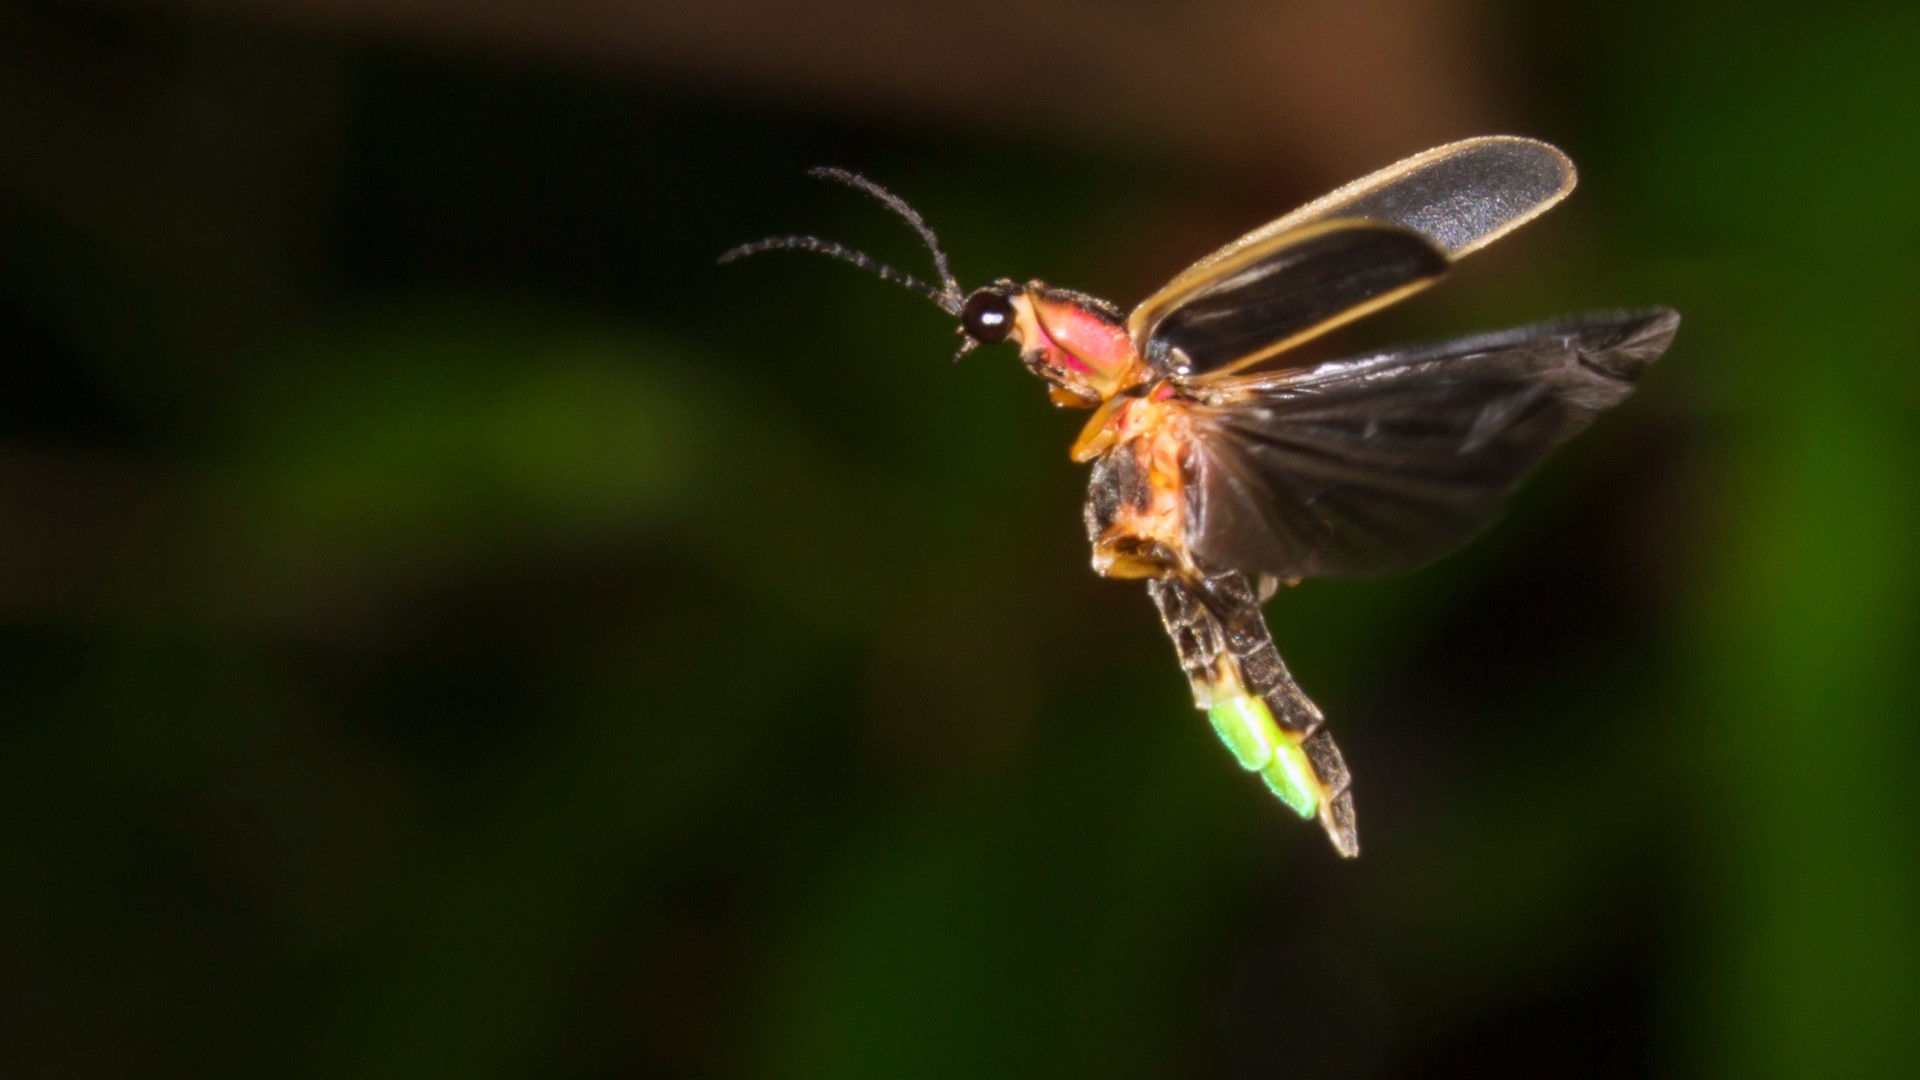 Fireflies, Moths, and Your Yard in the Dark